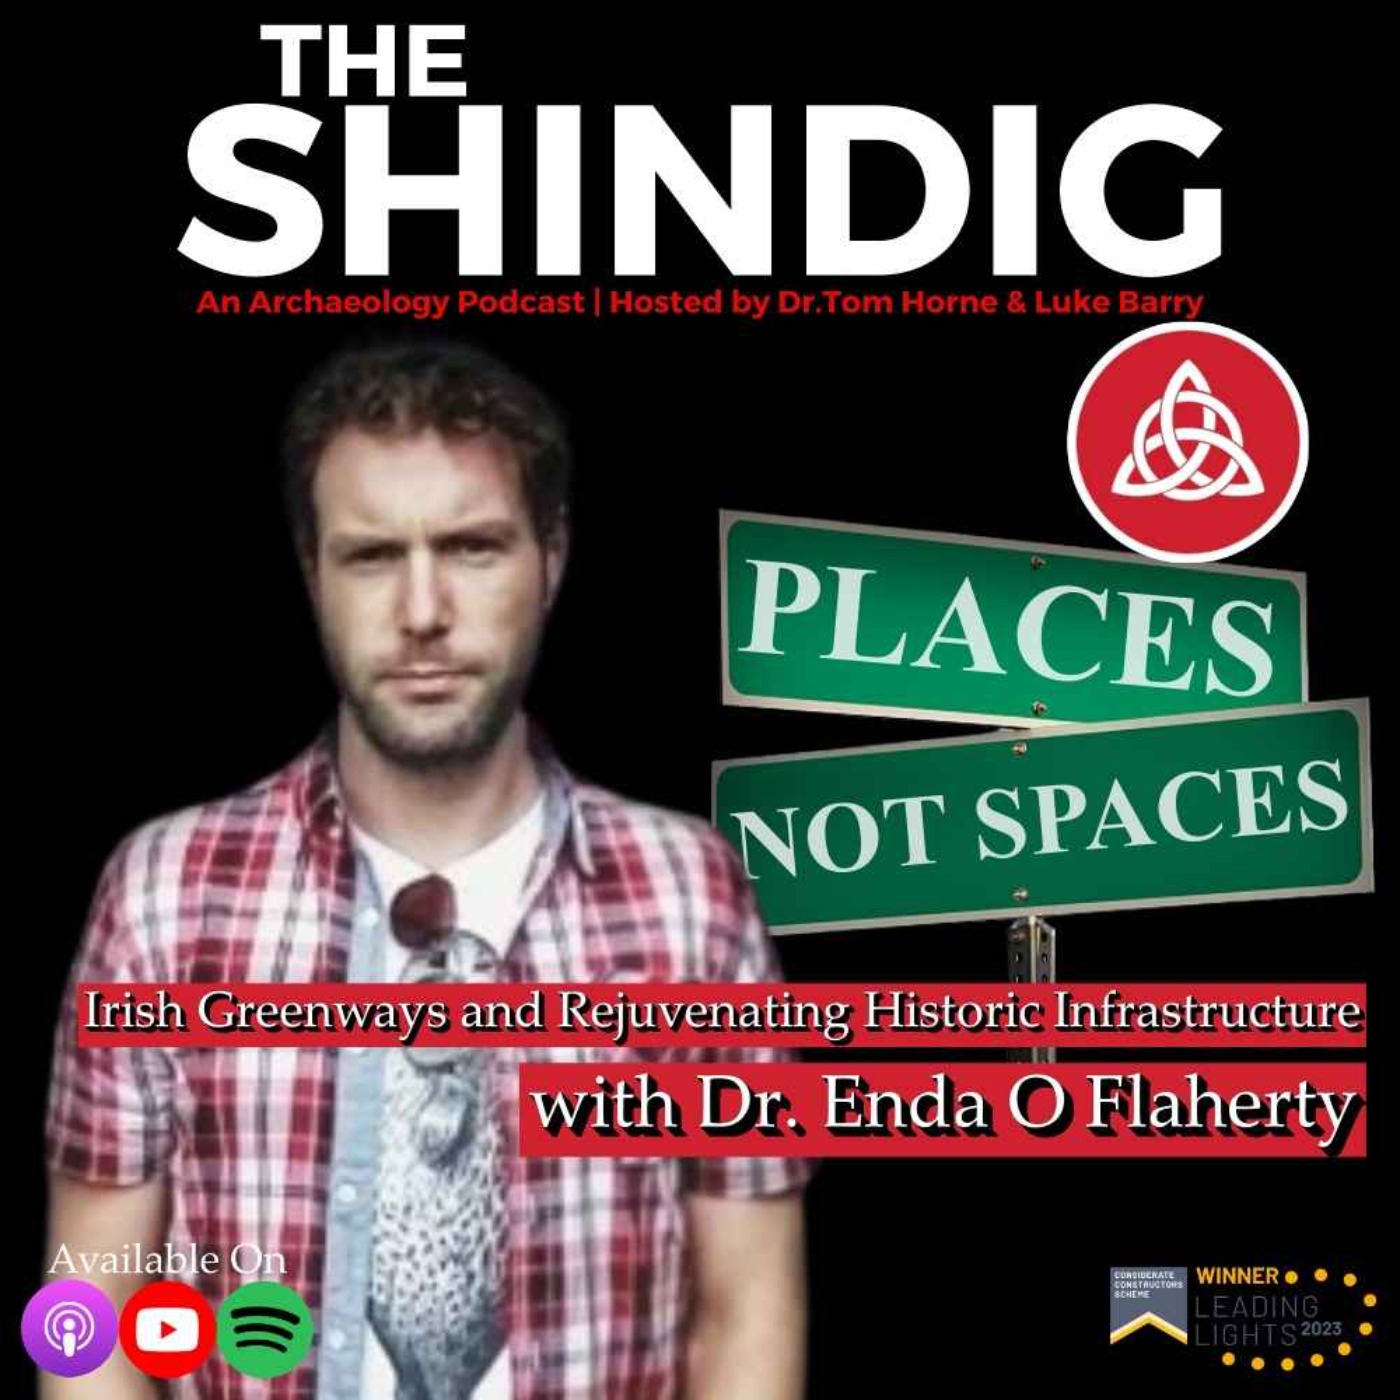 Irish Greenways and Rejuvenating Historic Infrastructures - With Dr. Enda O’Flaherty